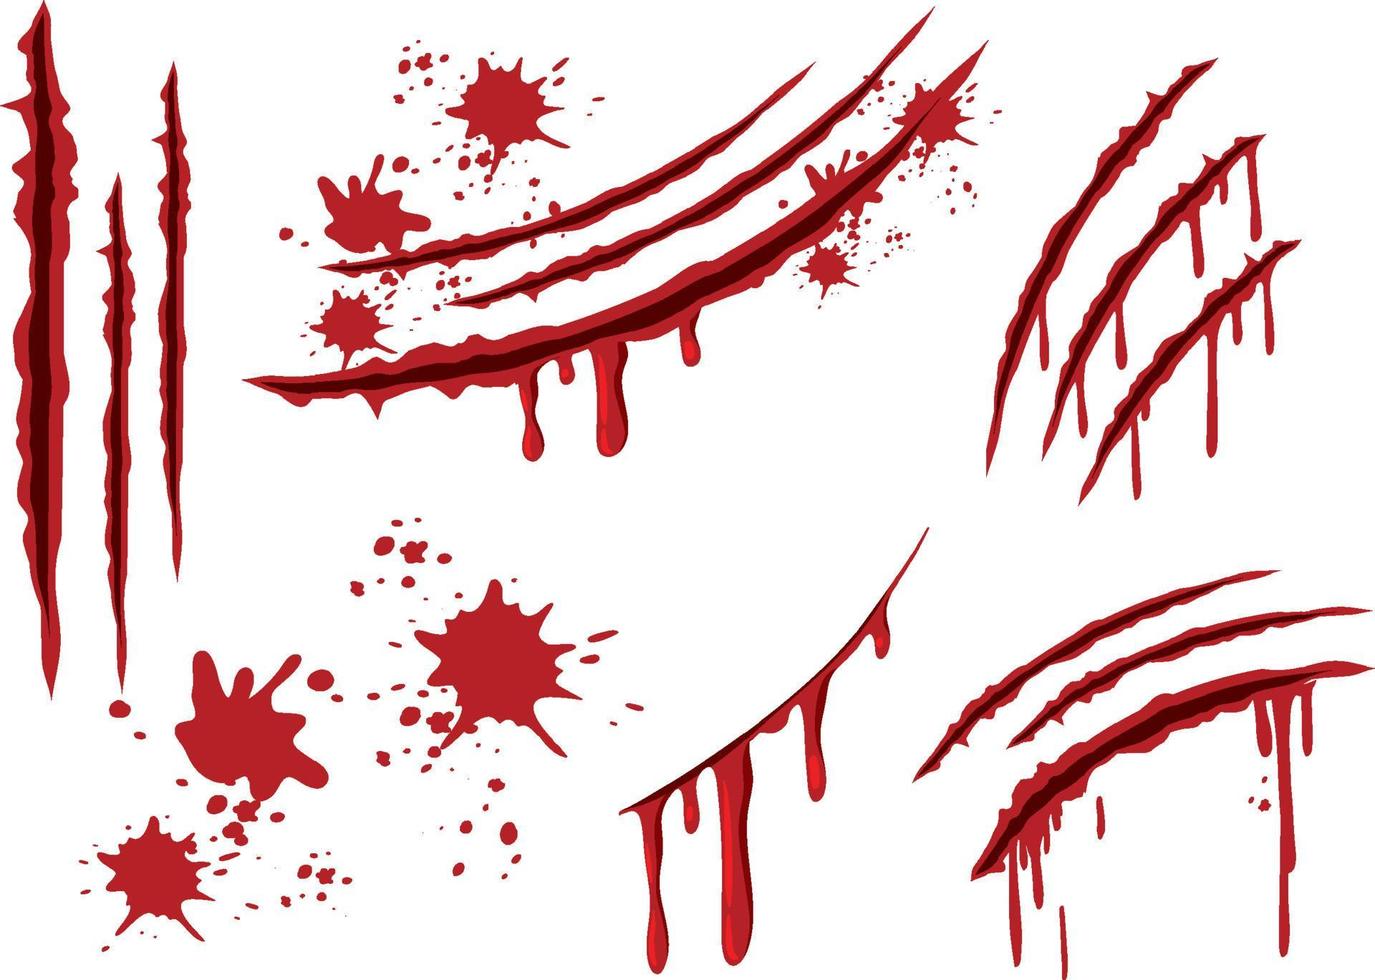 Blood claw scratch wounds on white background vector